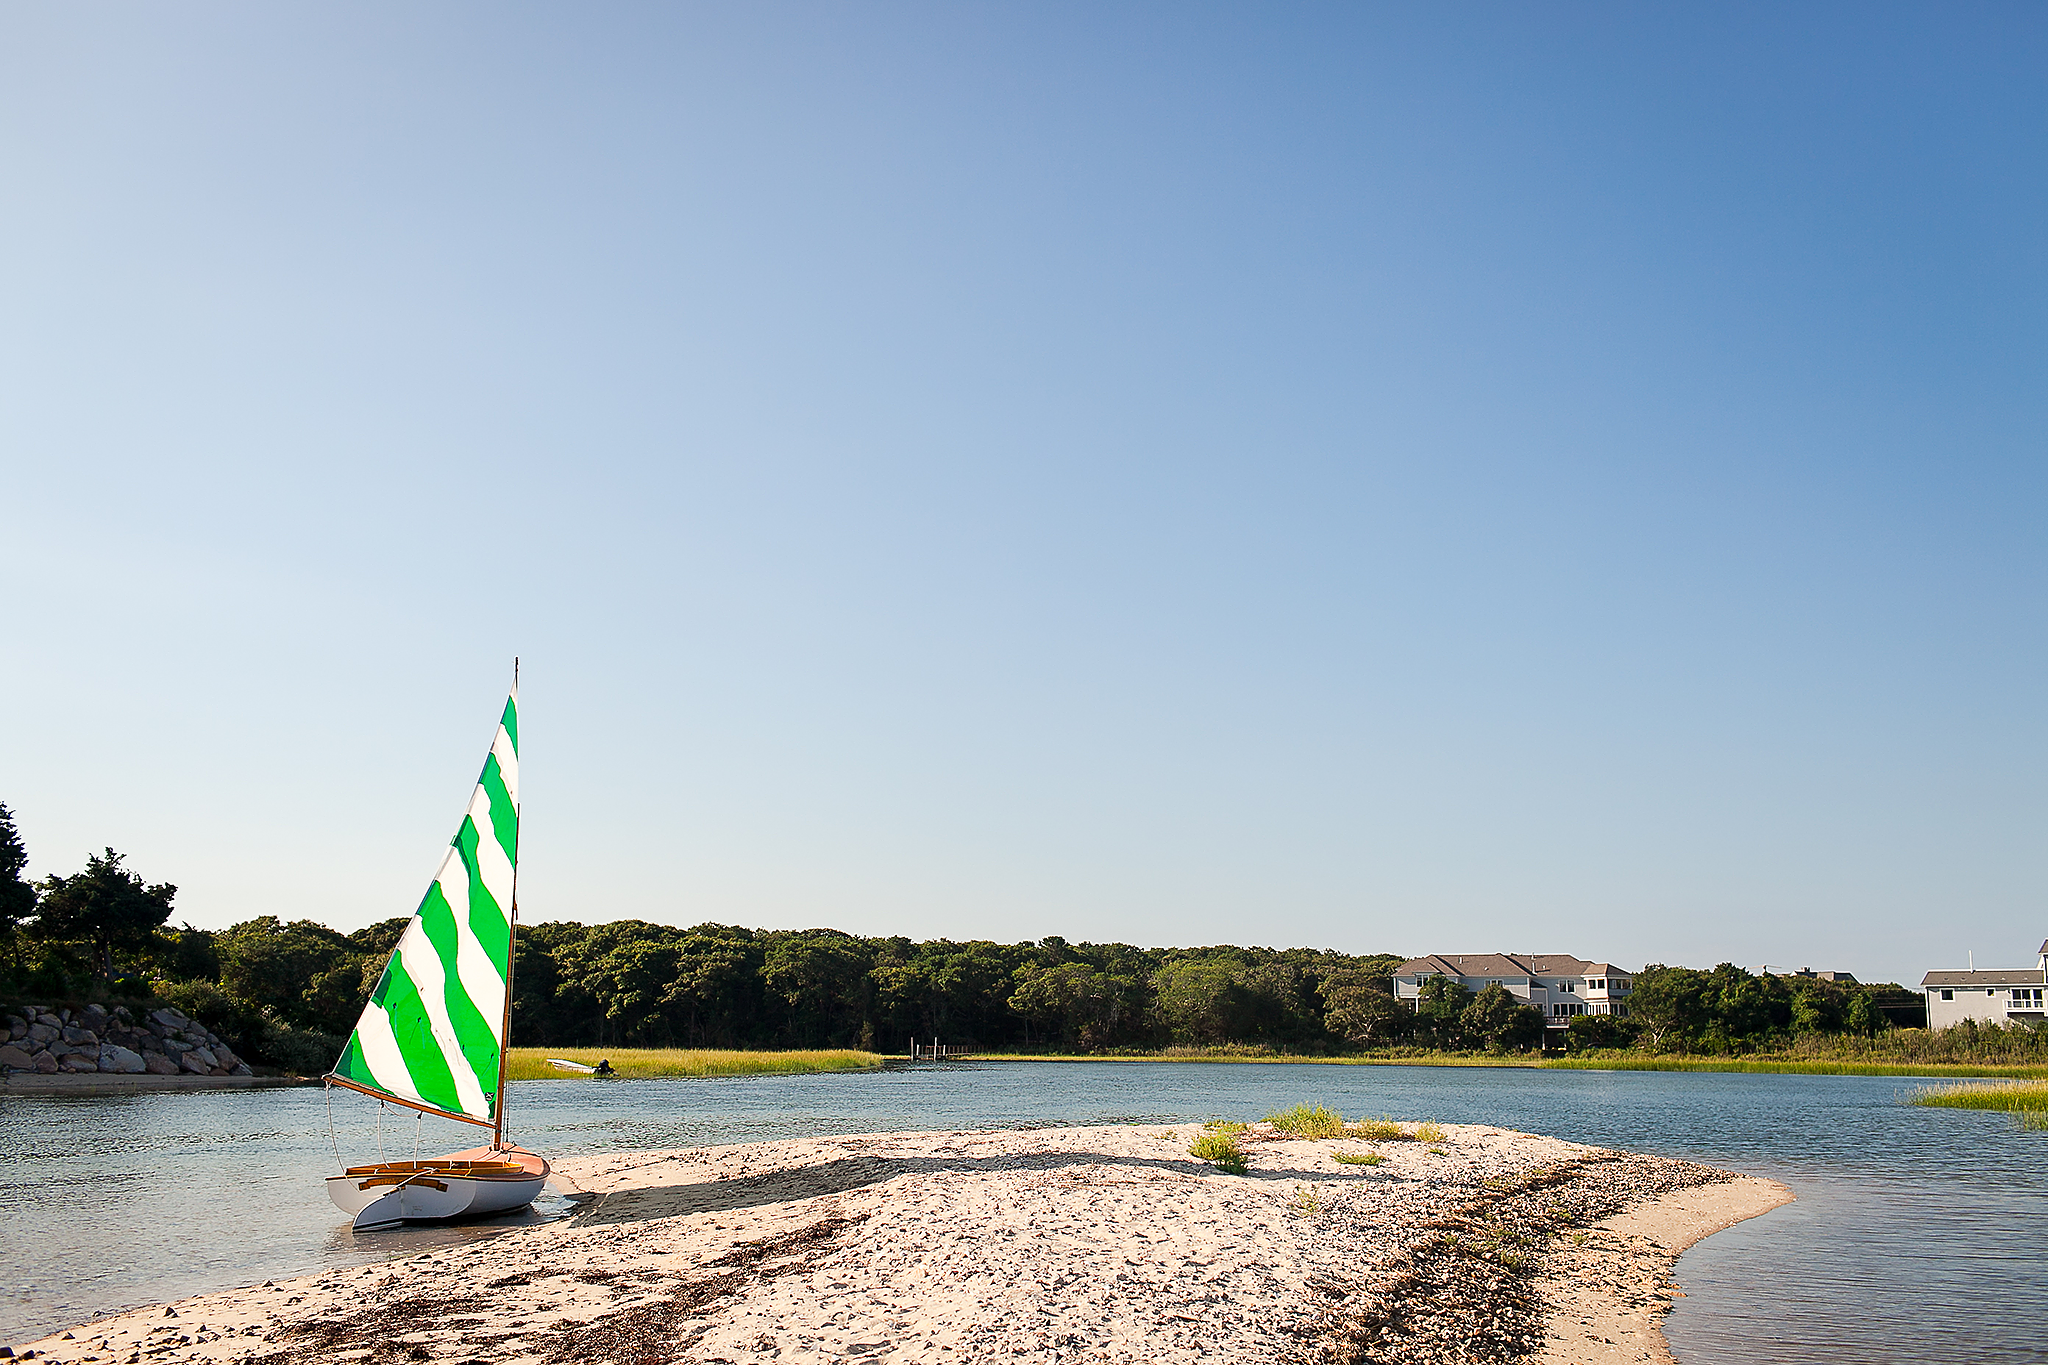 Sailboat on shore with green and white sale